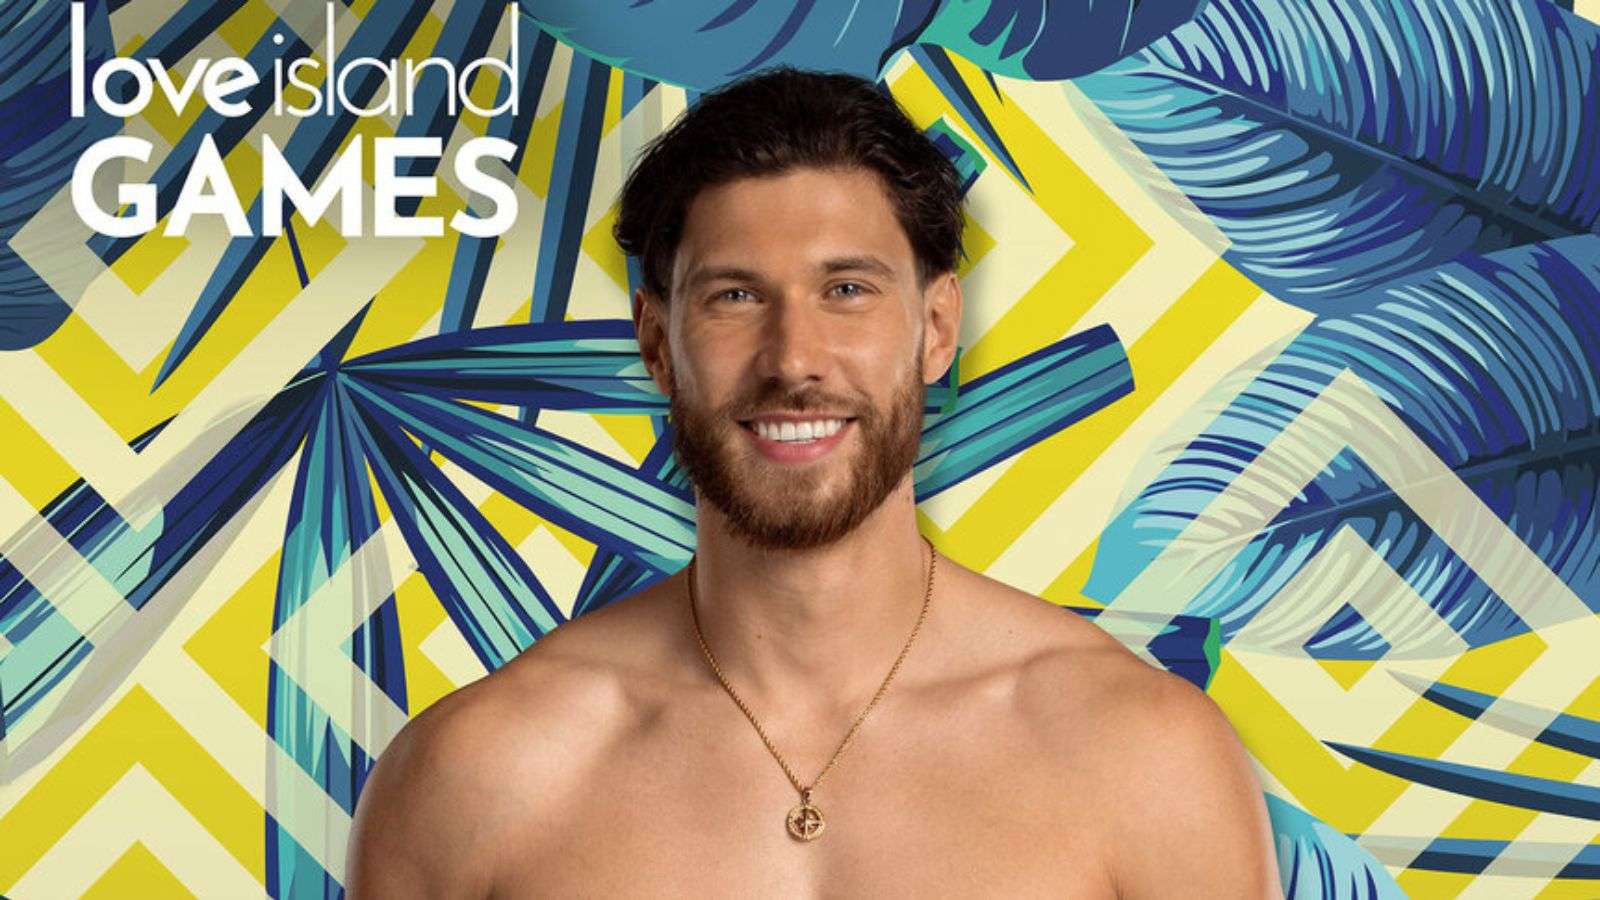 Jack Fowler from Love Island Games